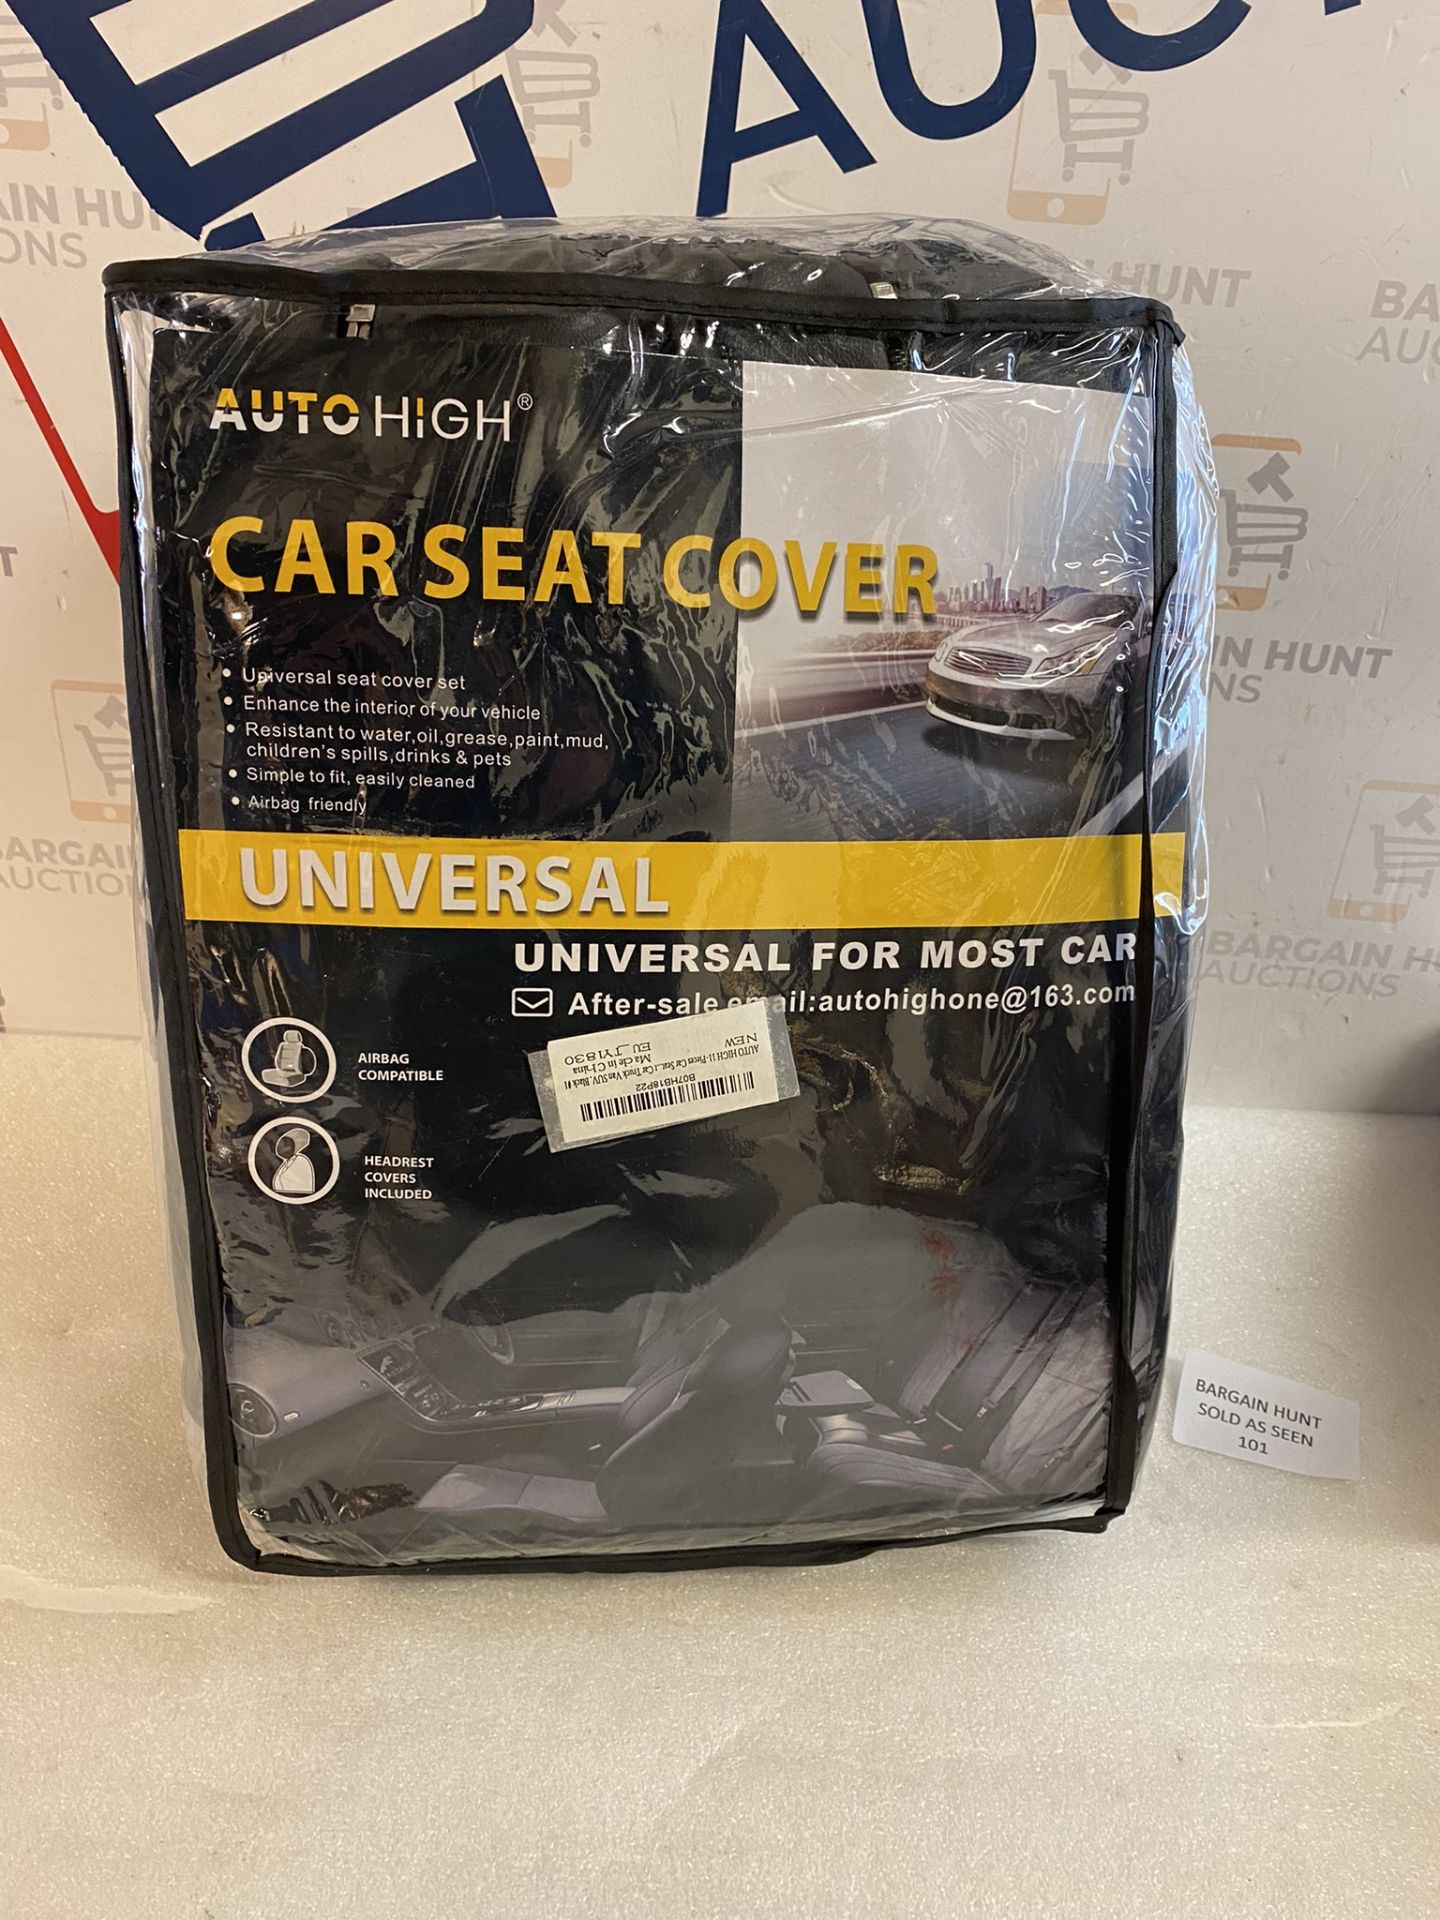 Auto High Premium Faux Leather Car Seat Cover Full Set RRP £59.99 - Image 2 of 2